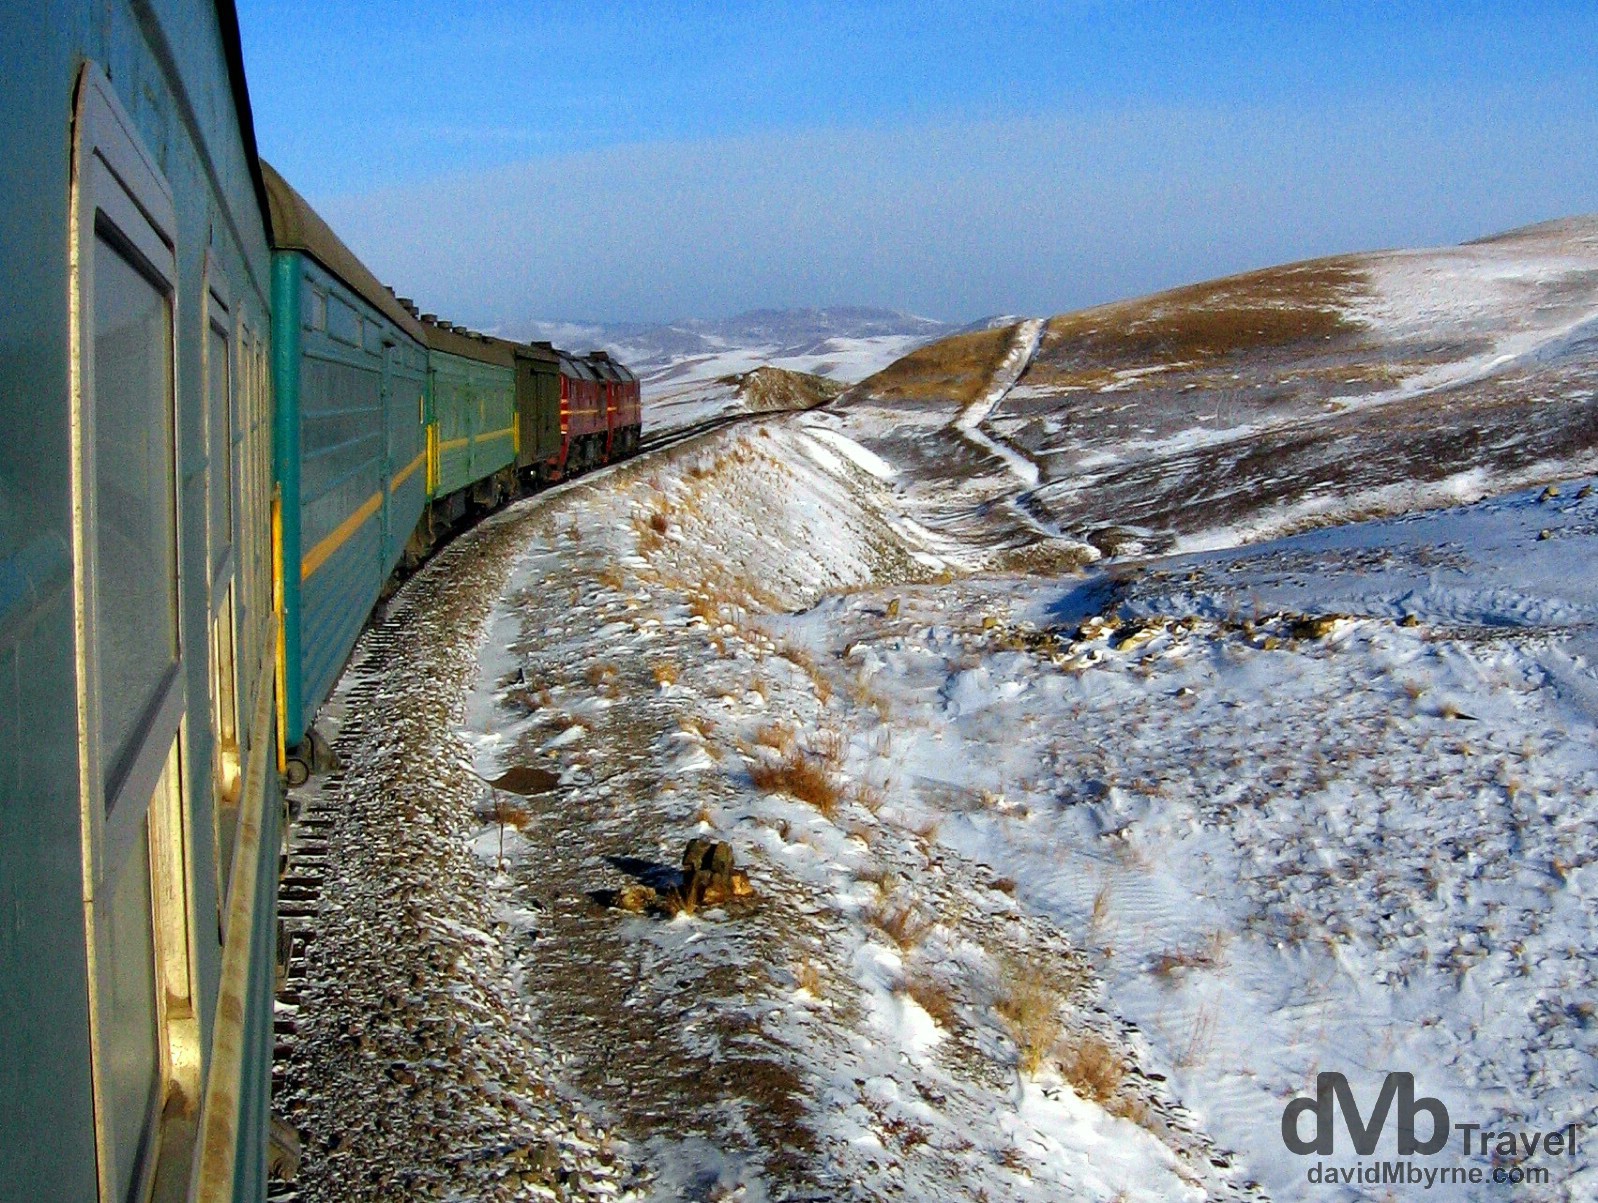 The Trans-Siberian train winding its way through the Gobi Desert in central Mongolia during my first Trans-Siberian adventure. February 15th 2006.